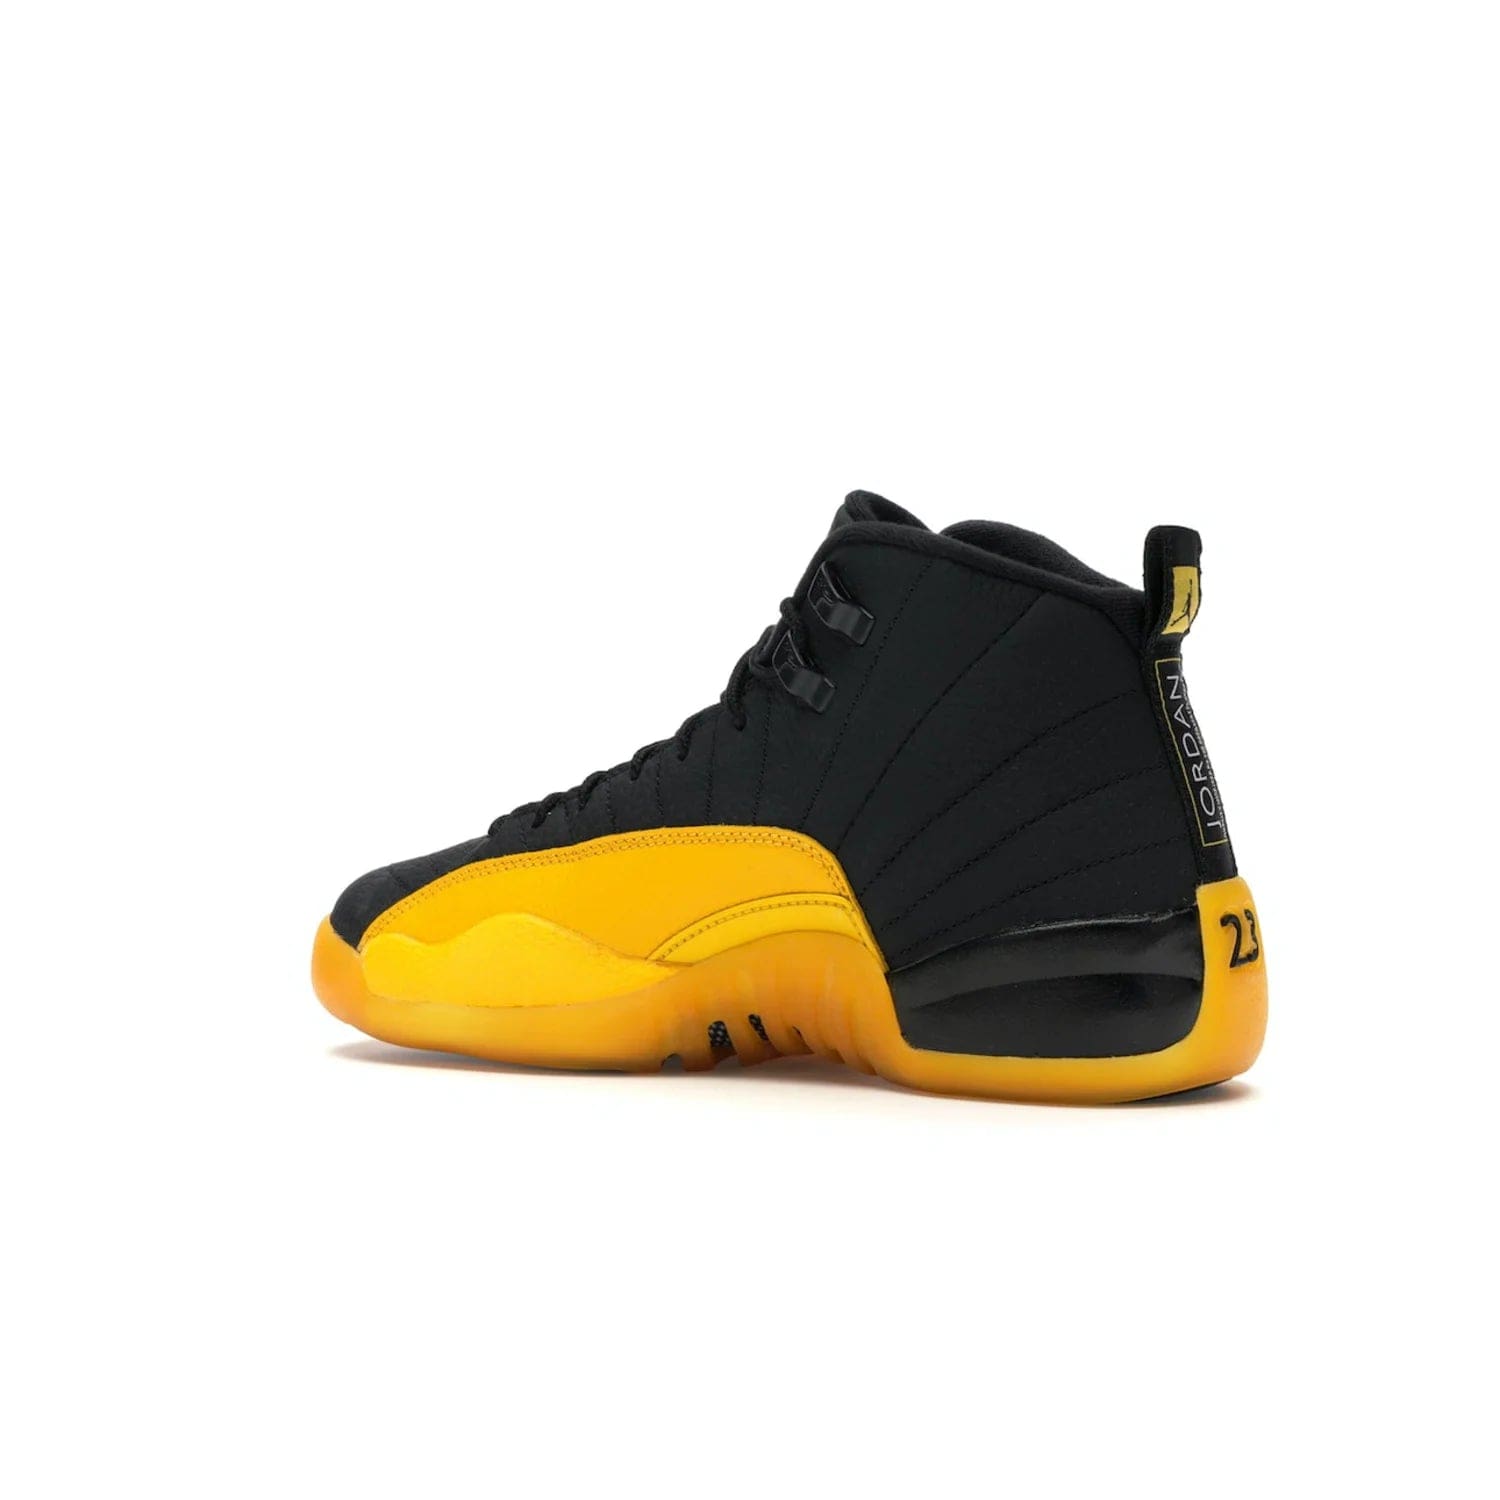 Jordan 12 Retro Black University Gold (GS) - Image 22 - Only at www.BallersClubKickz.com - Upgrade your kid's shoe collection with the Jordan 12 Retro Black University Gold. With classic style, black tumbled leather upper, and University Gold accents, it's a great summer look. Out July 2020.